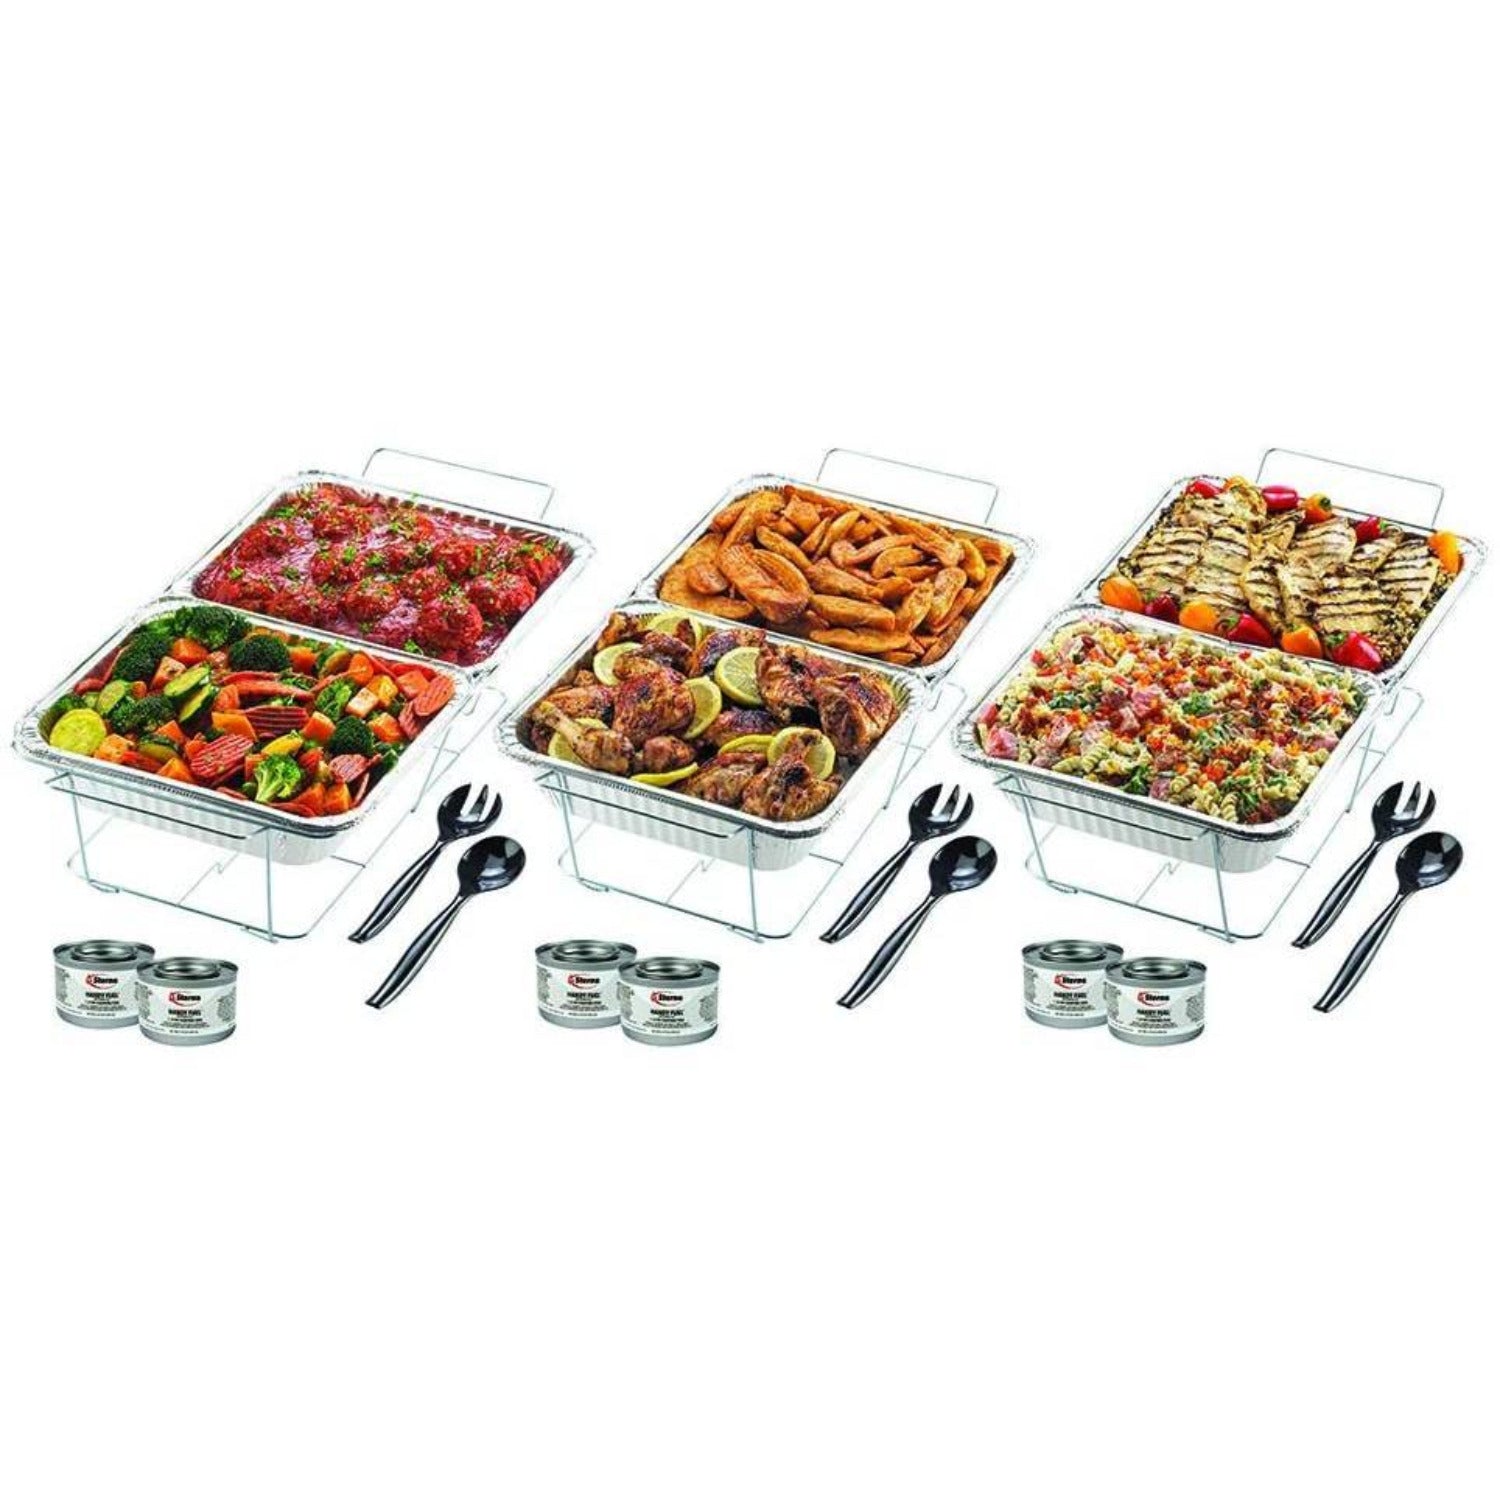 Buffet Serving Kit Disposable Aluminum Chafing Dish Buffet Party Set 24PC Disposable Nicole Fantini Collection   